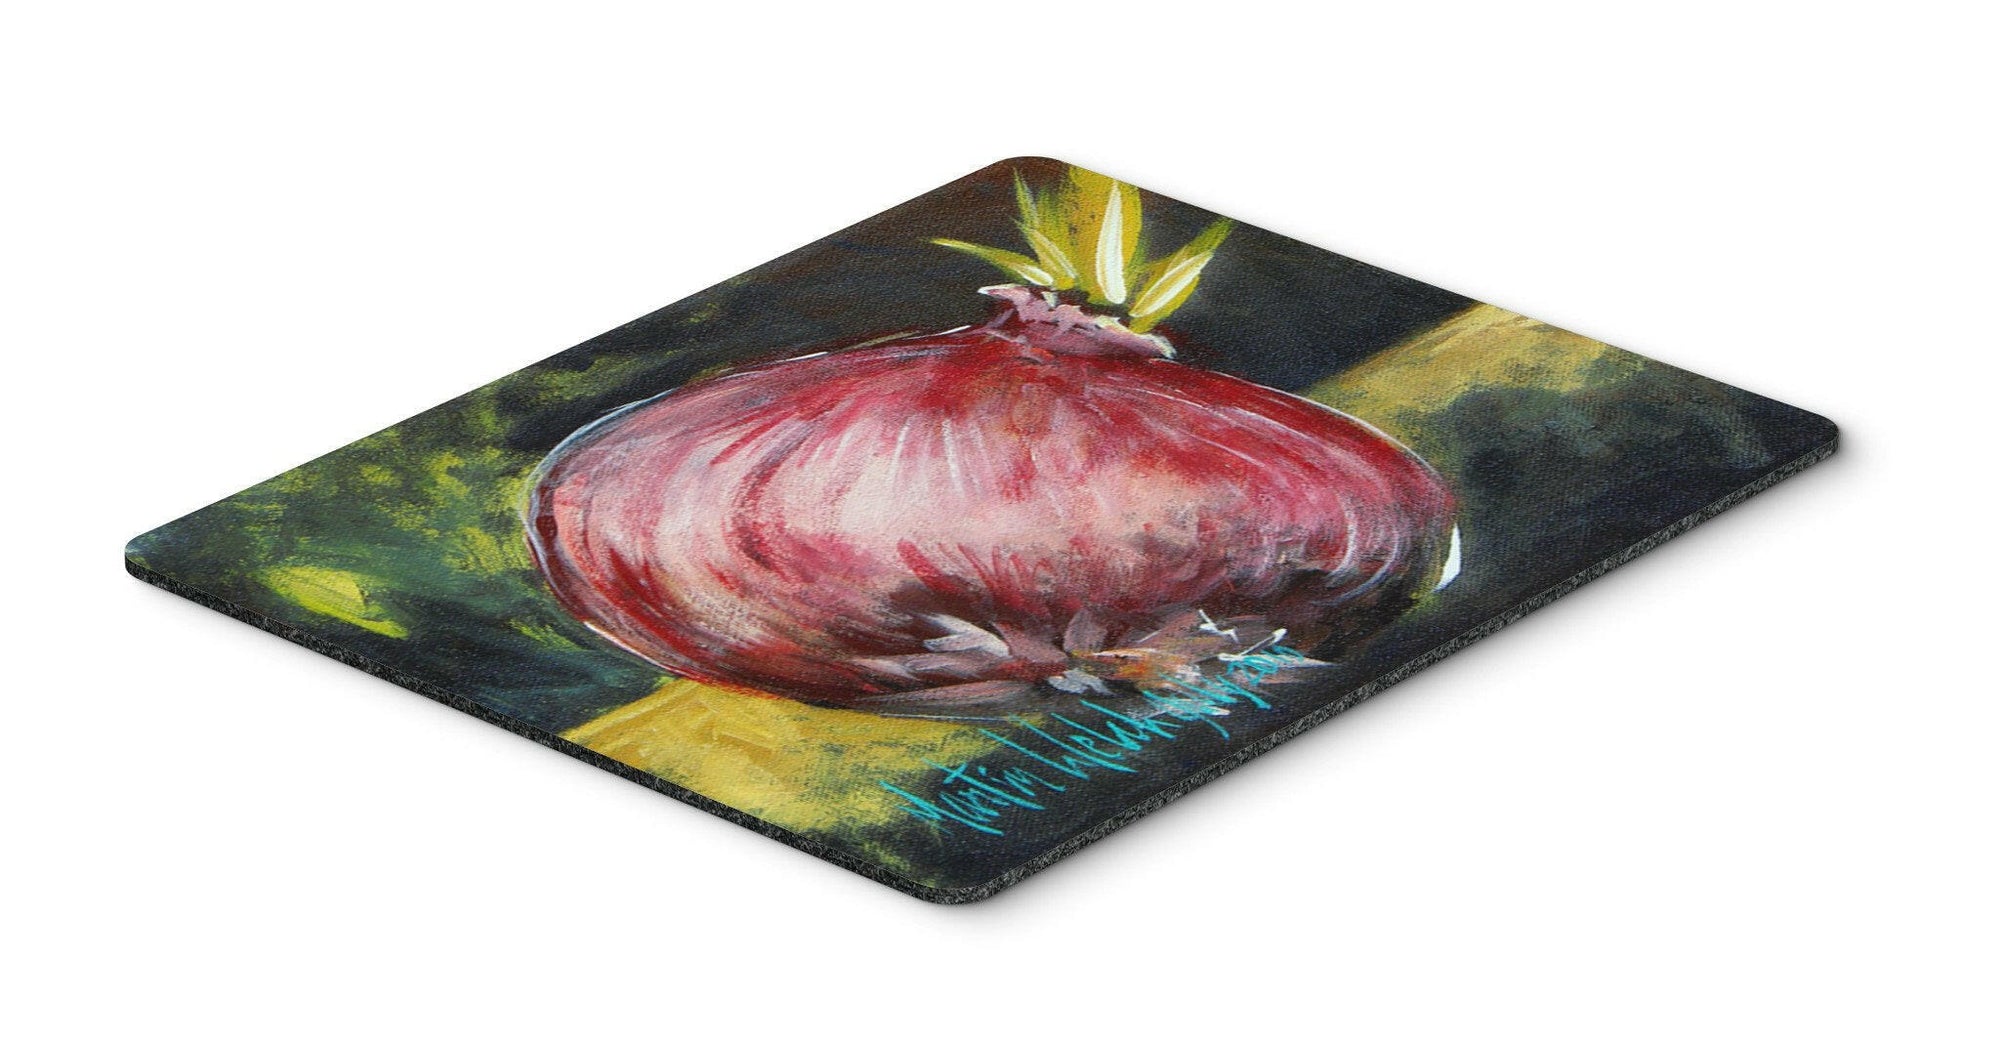 Vegetables - Onion One-Yun Mouse Pad, Hot Pad or Trivet by Caroline's Treasures